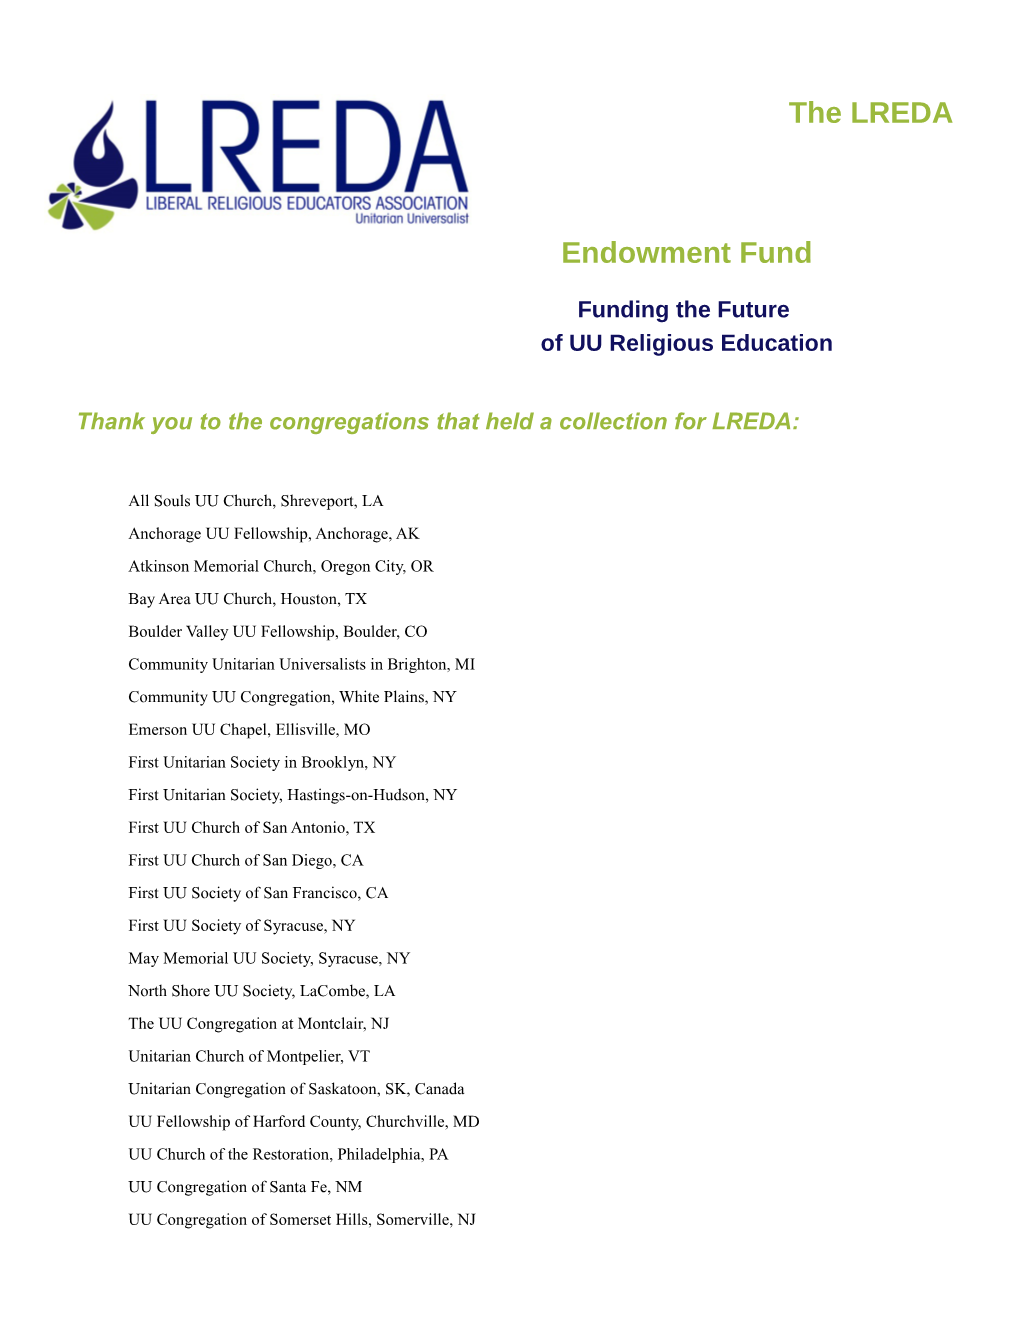 Thank You to the Congregations That Held a Collection for LREDA